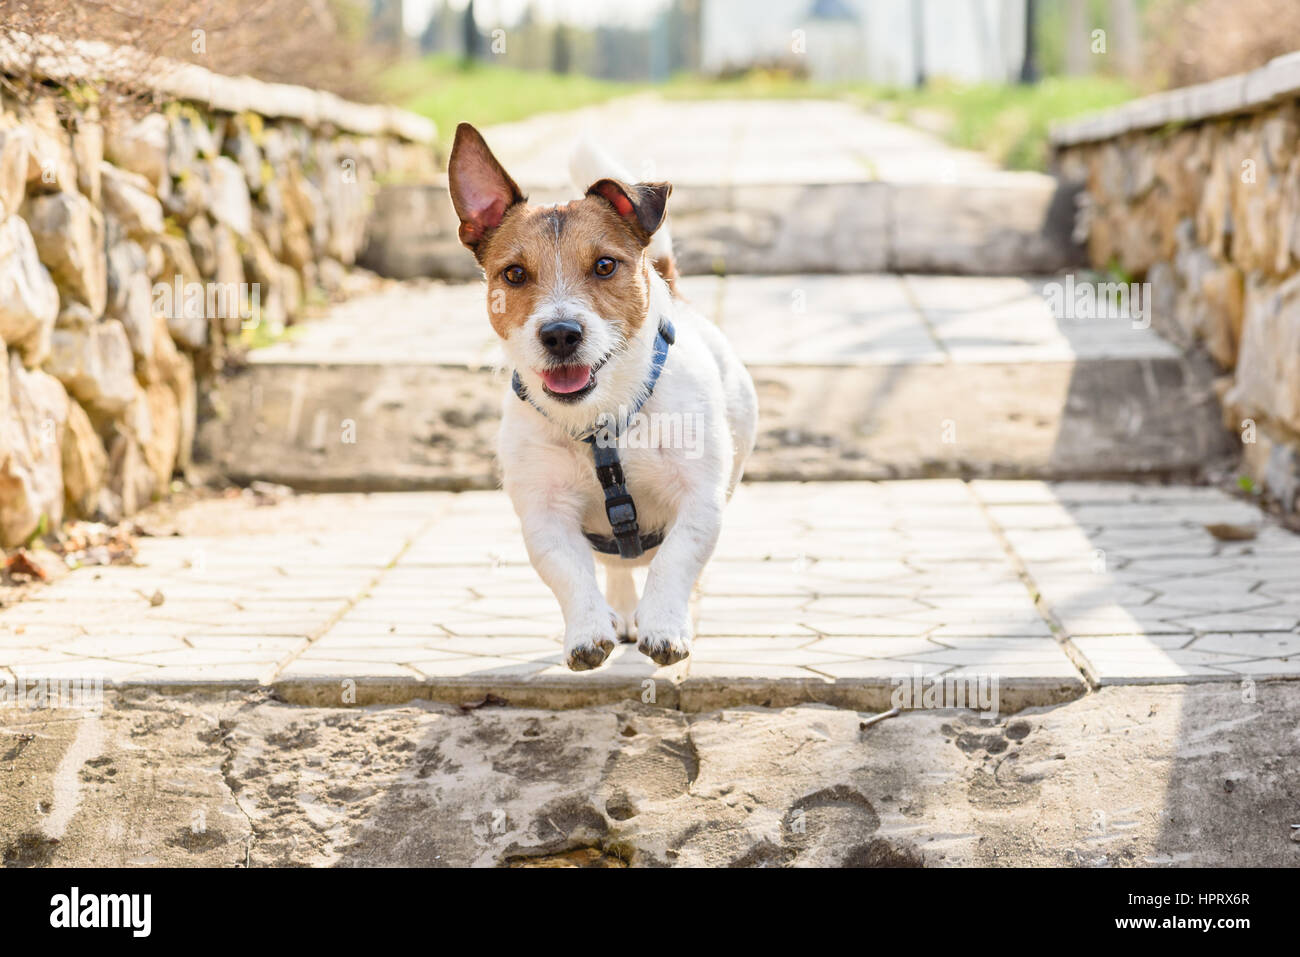 Cute dog running and playing on ladder stairs looking at camera Stock Photo